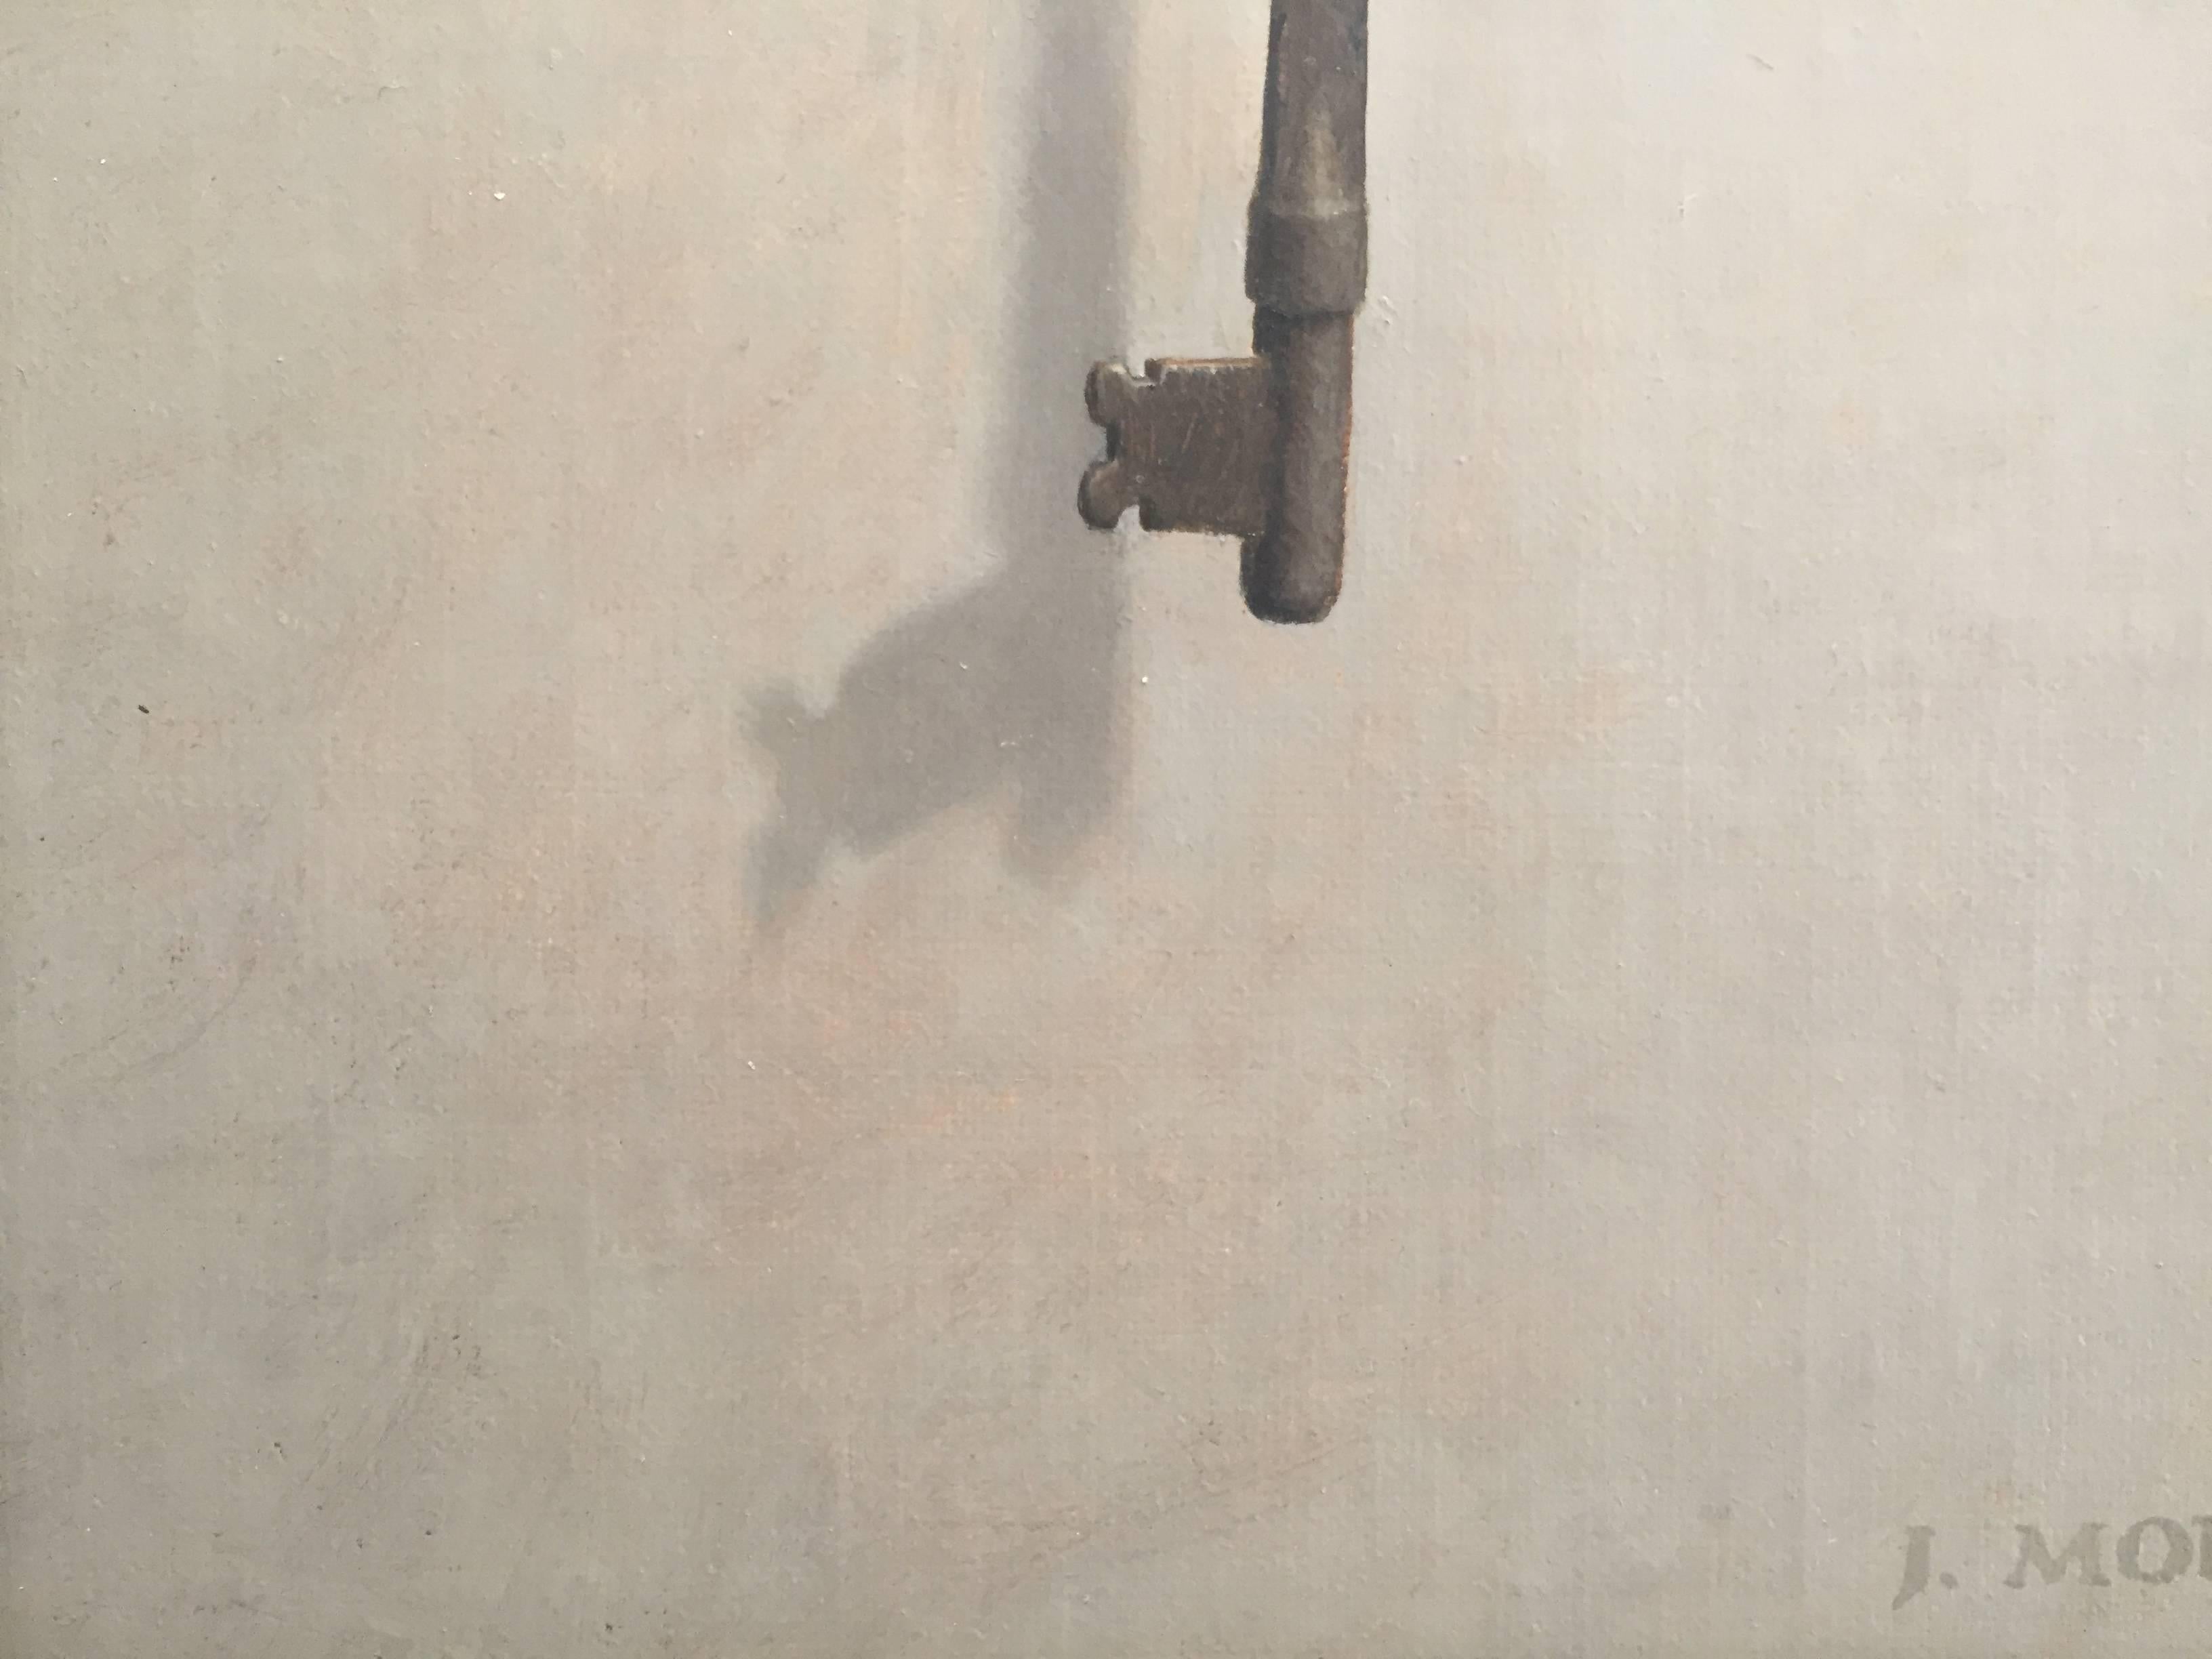 An old-fashioned barrel key hangs from a single nail on a grey wall. A shadow falls to the lower left, indicating the light source must come from the upper right. Morfis, painting in the style of 